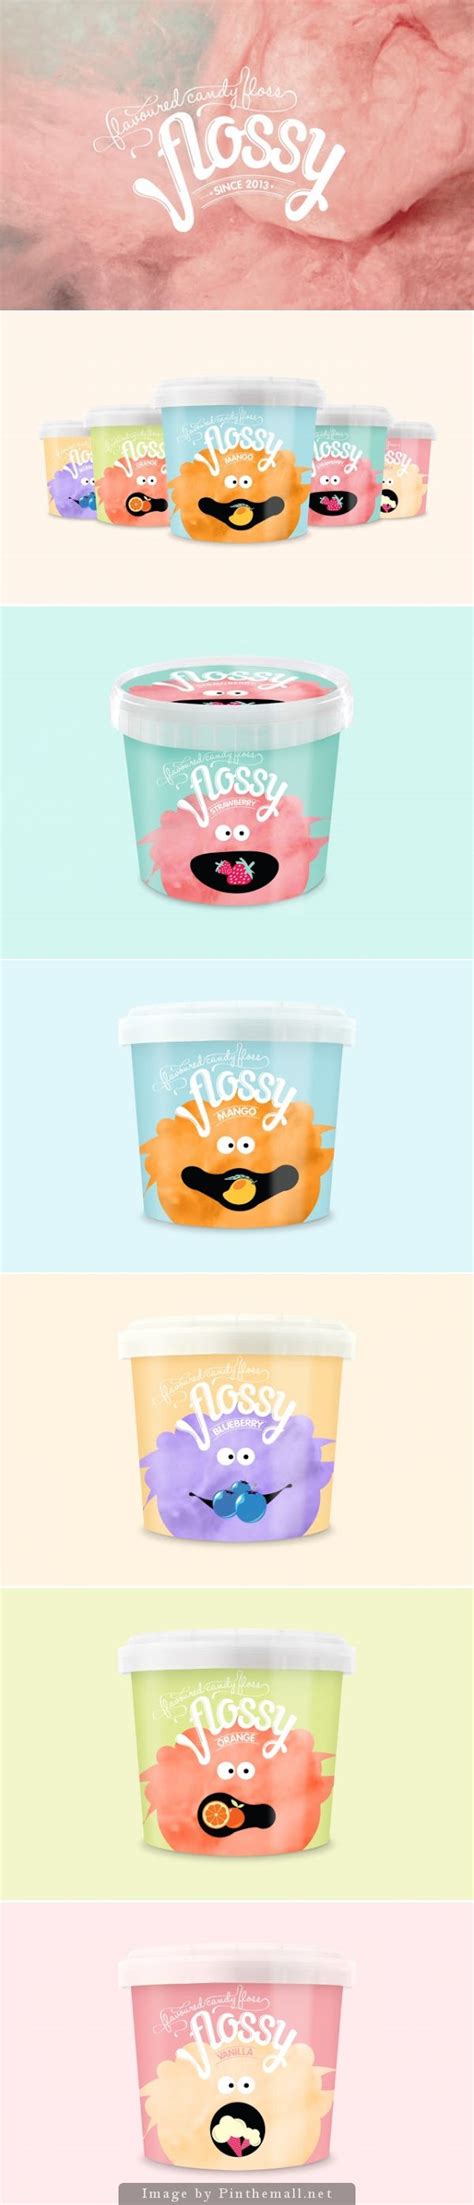 Flossy Flavoured Candy Floss A Grouped Images Picture Graphic